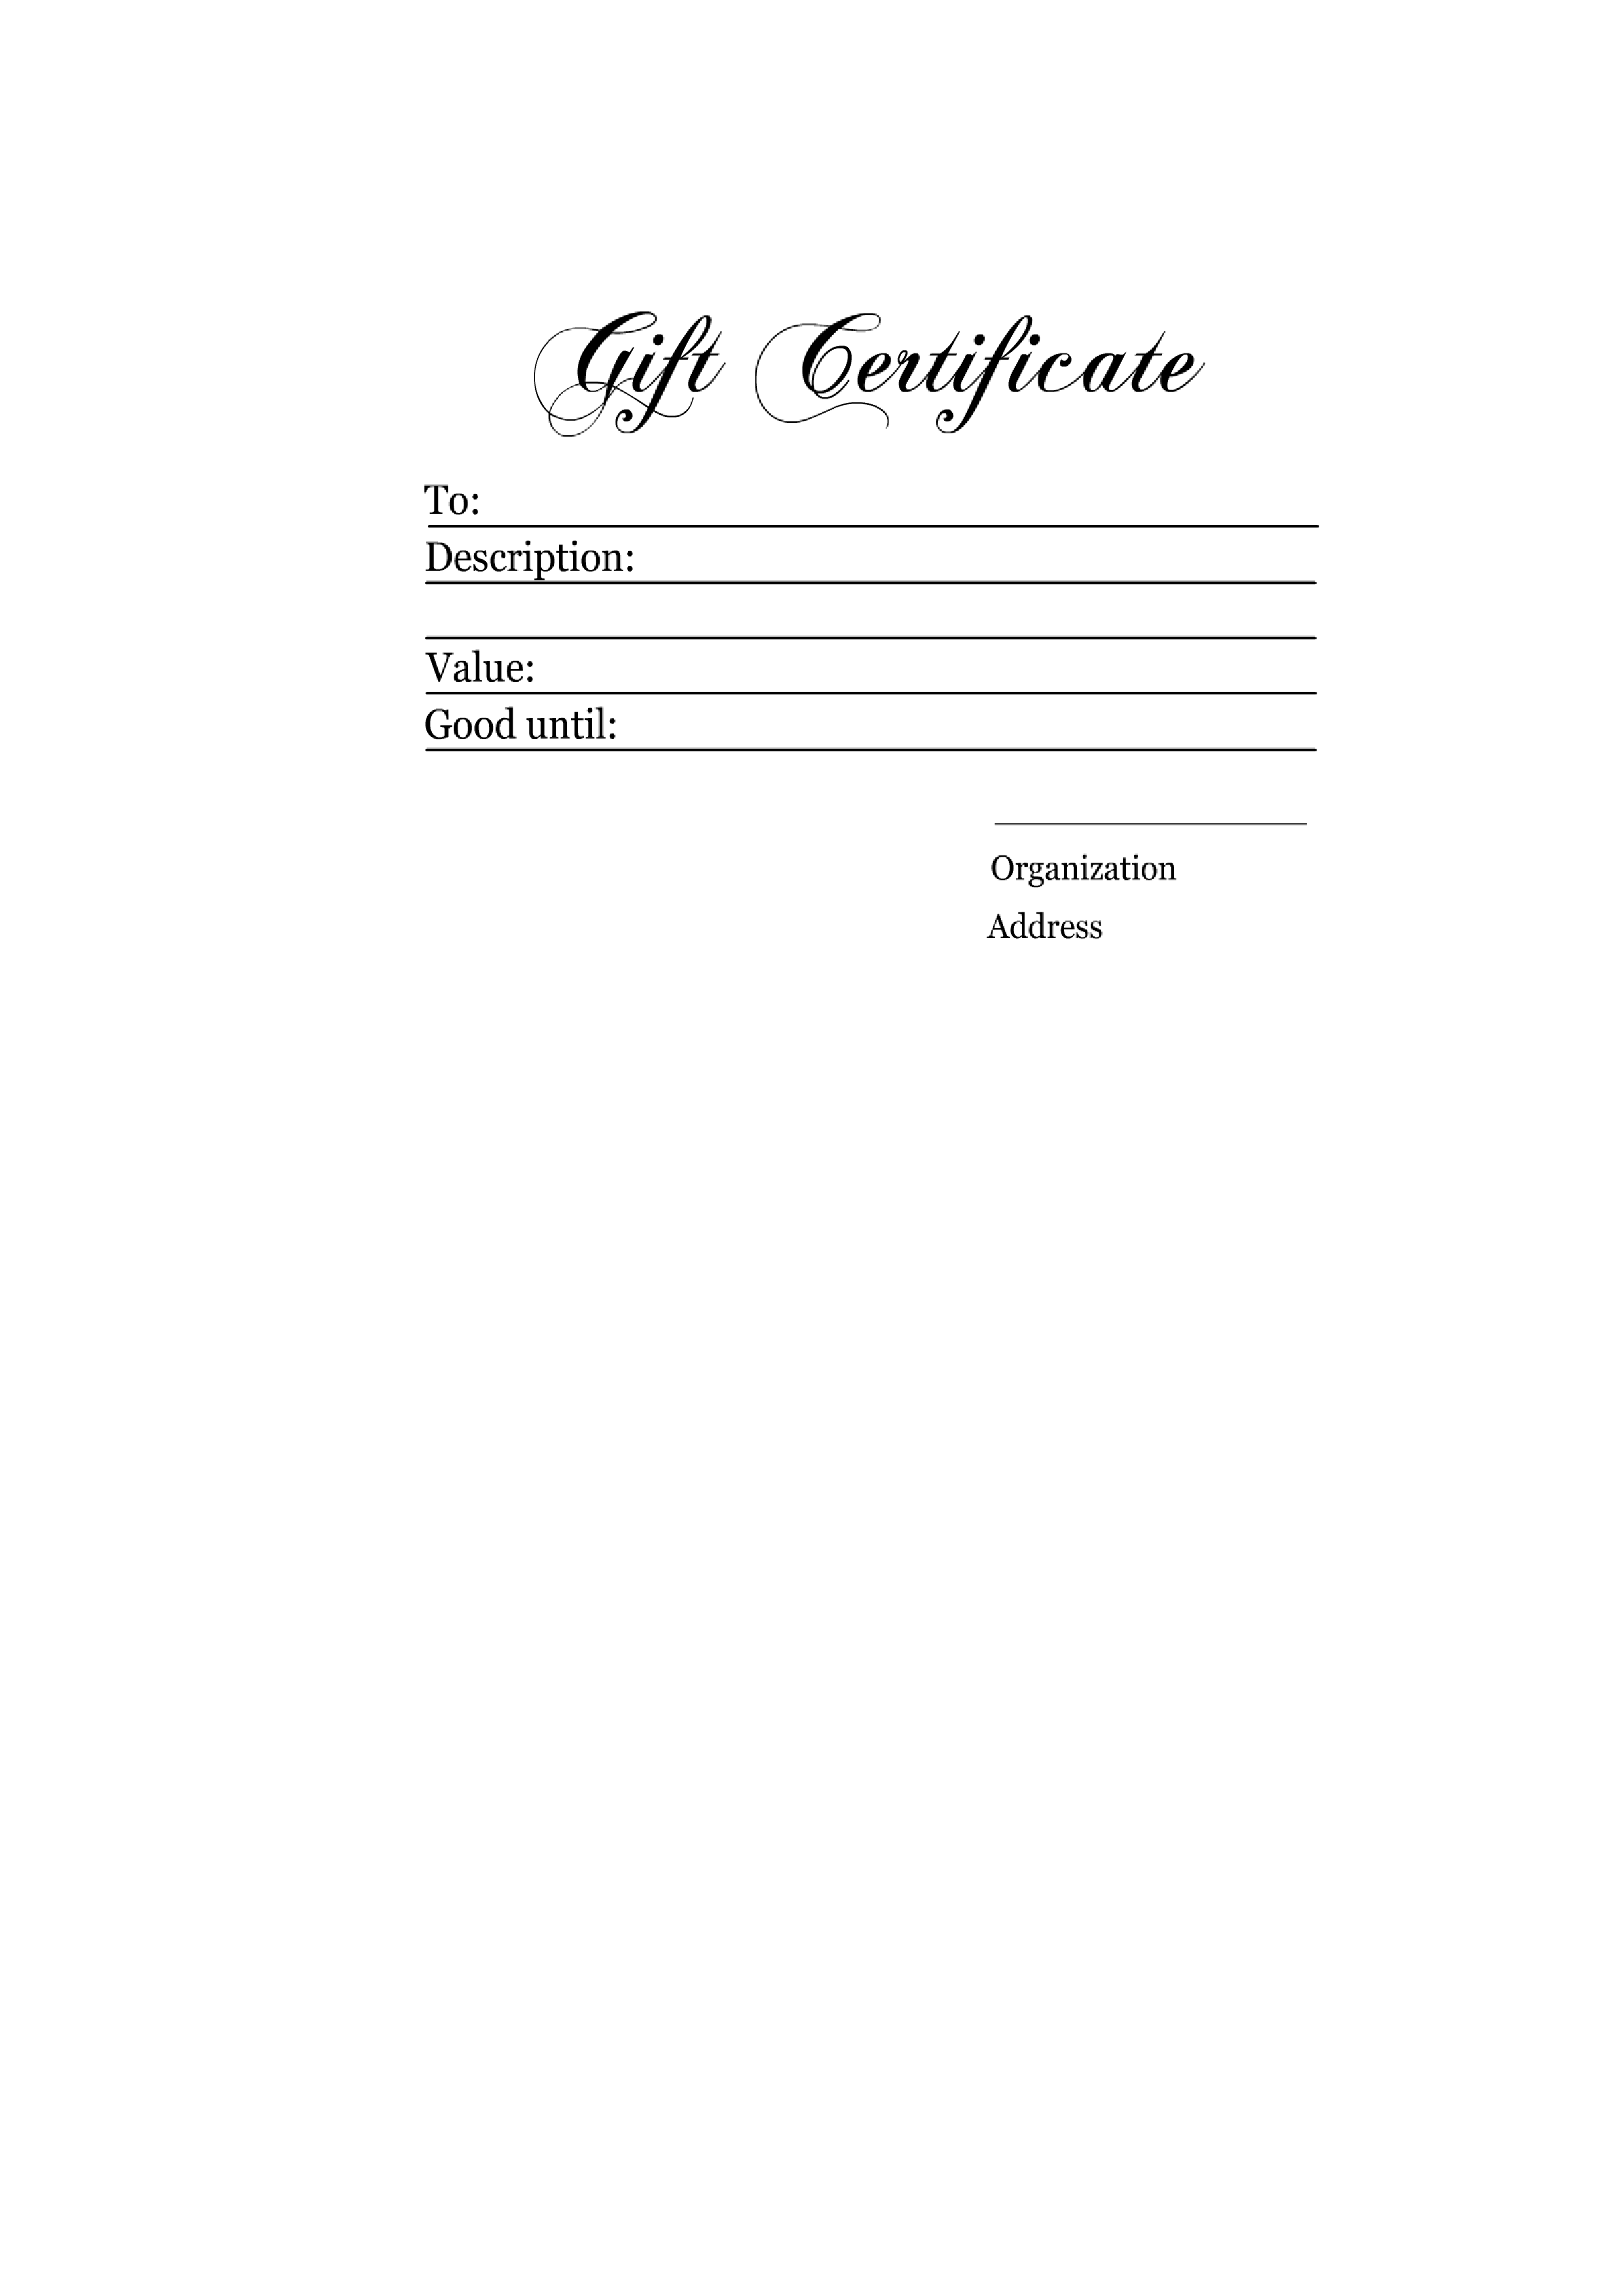 Authentic Gift Certificate main image